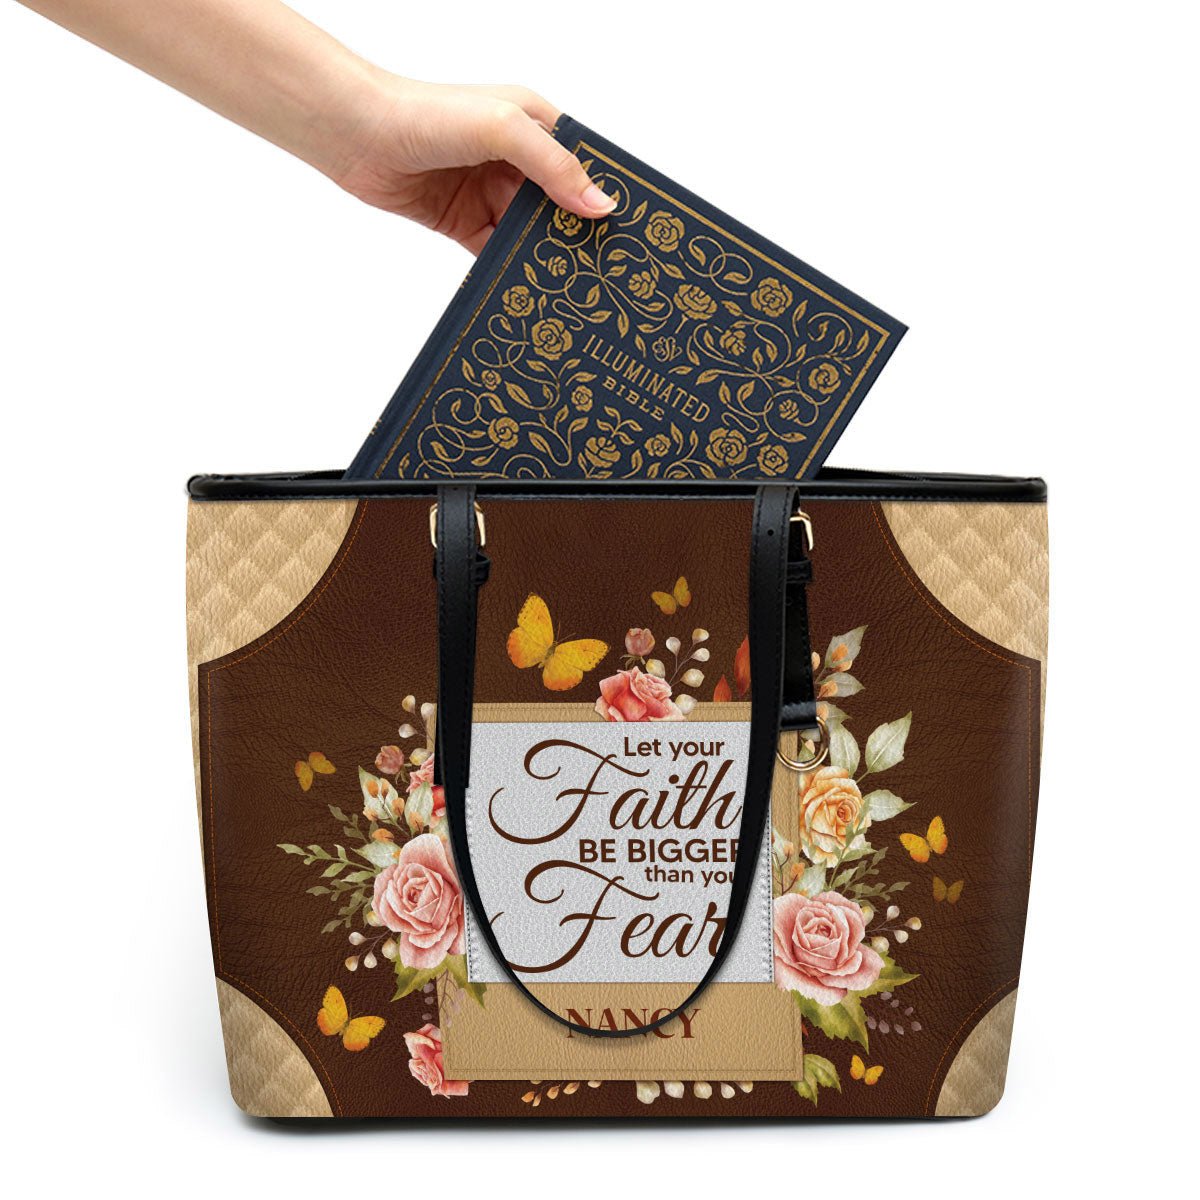 Let Your Faith Be Bigger Than Your Fear Personalized Pu Leather Tote Bag For Women - Mom Gifts For Mothers Day